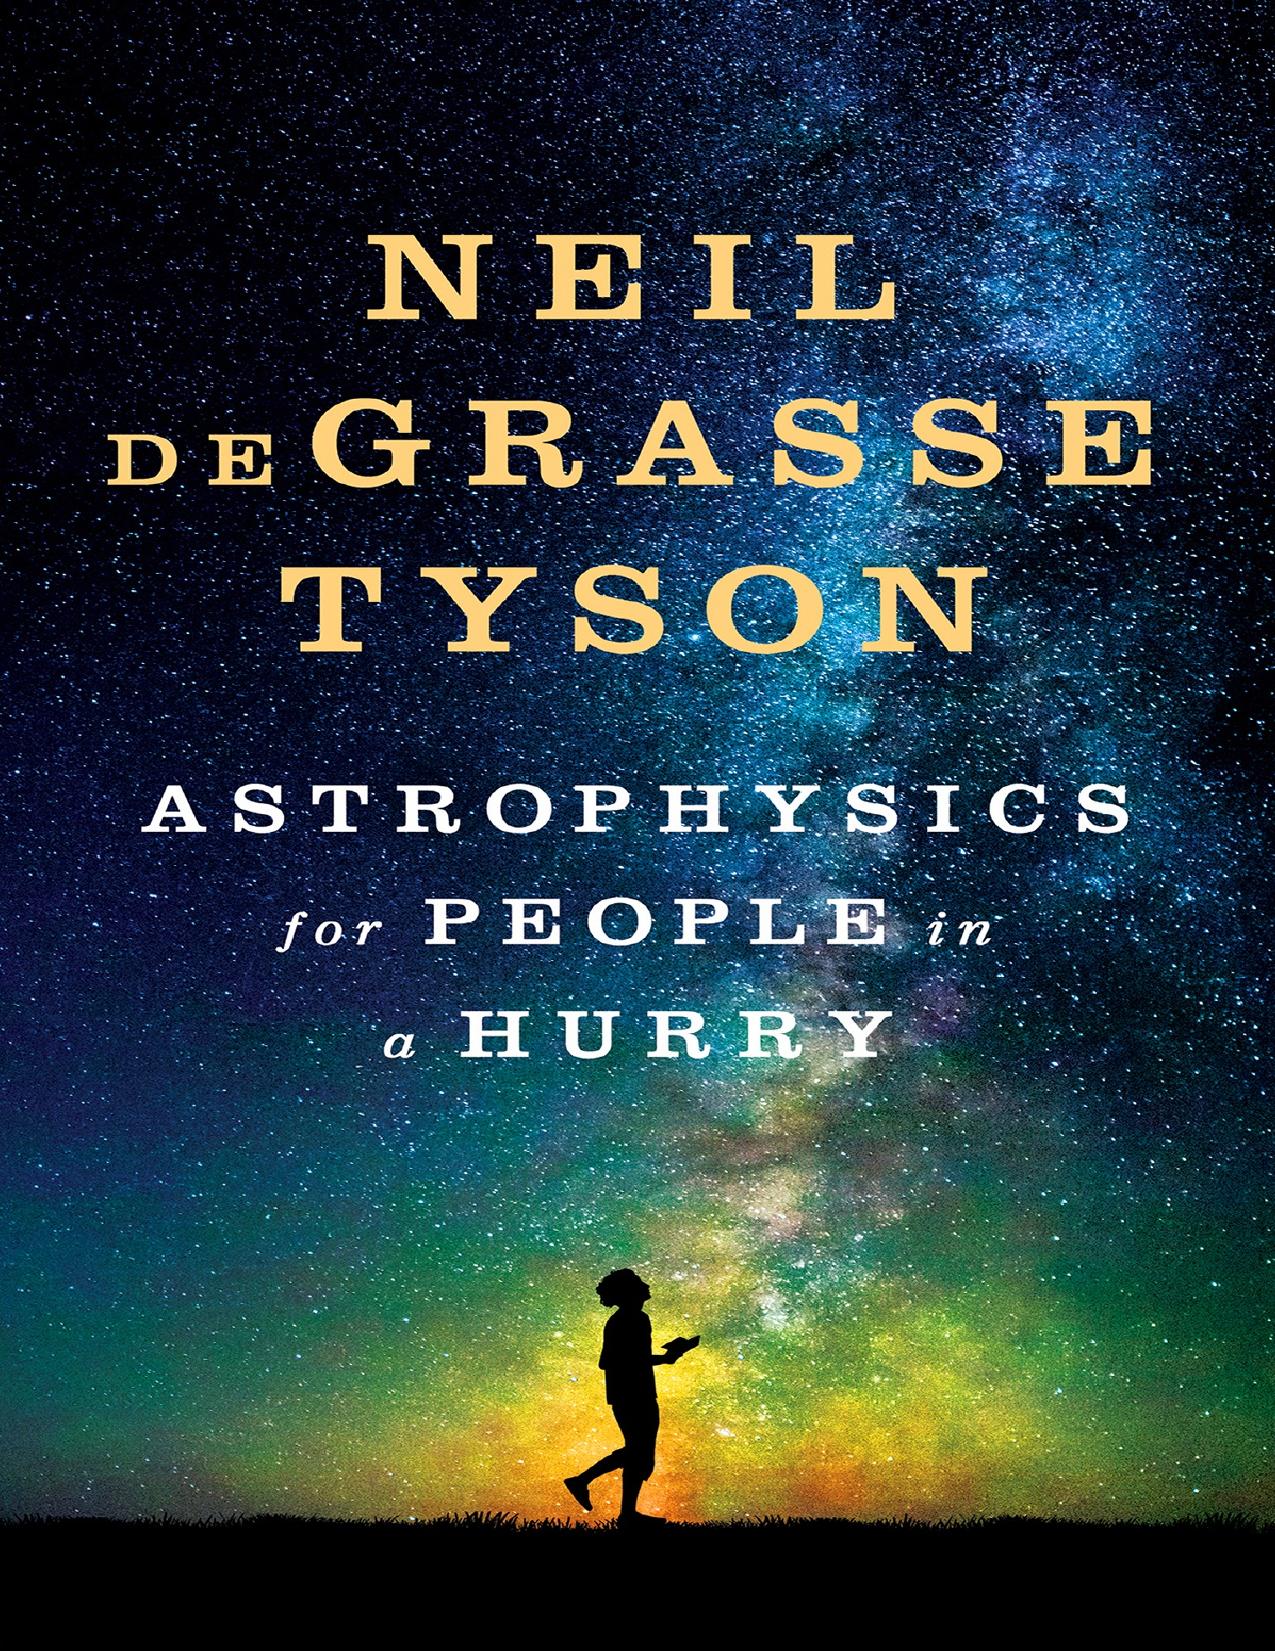 Astrophysics for People in a Hurry by Neil DeGrasse Tyson